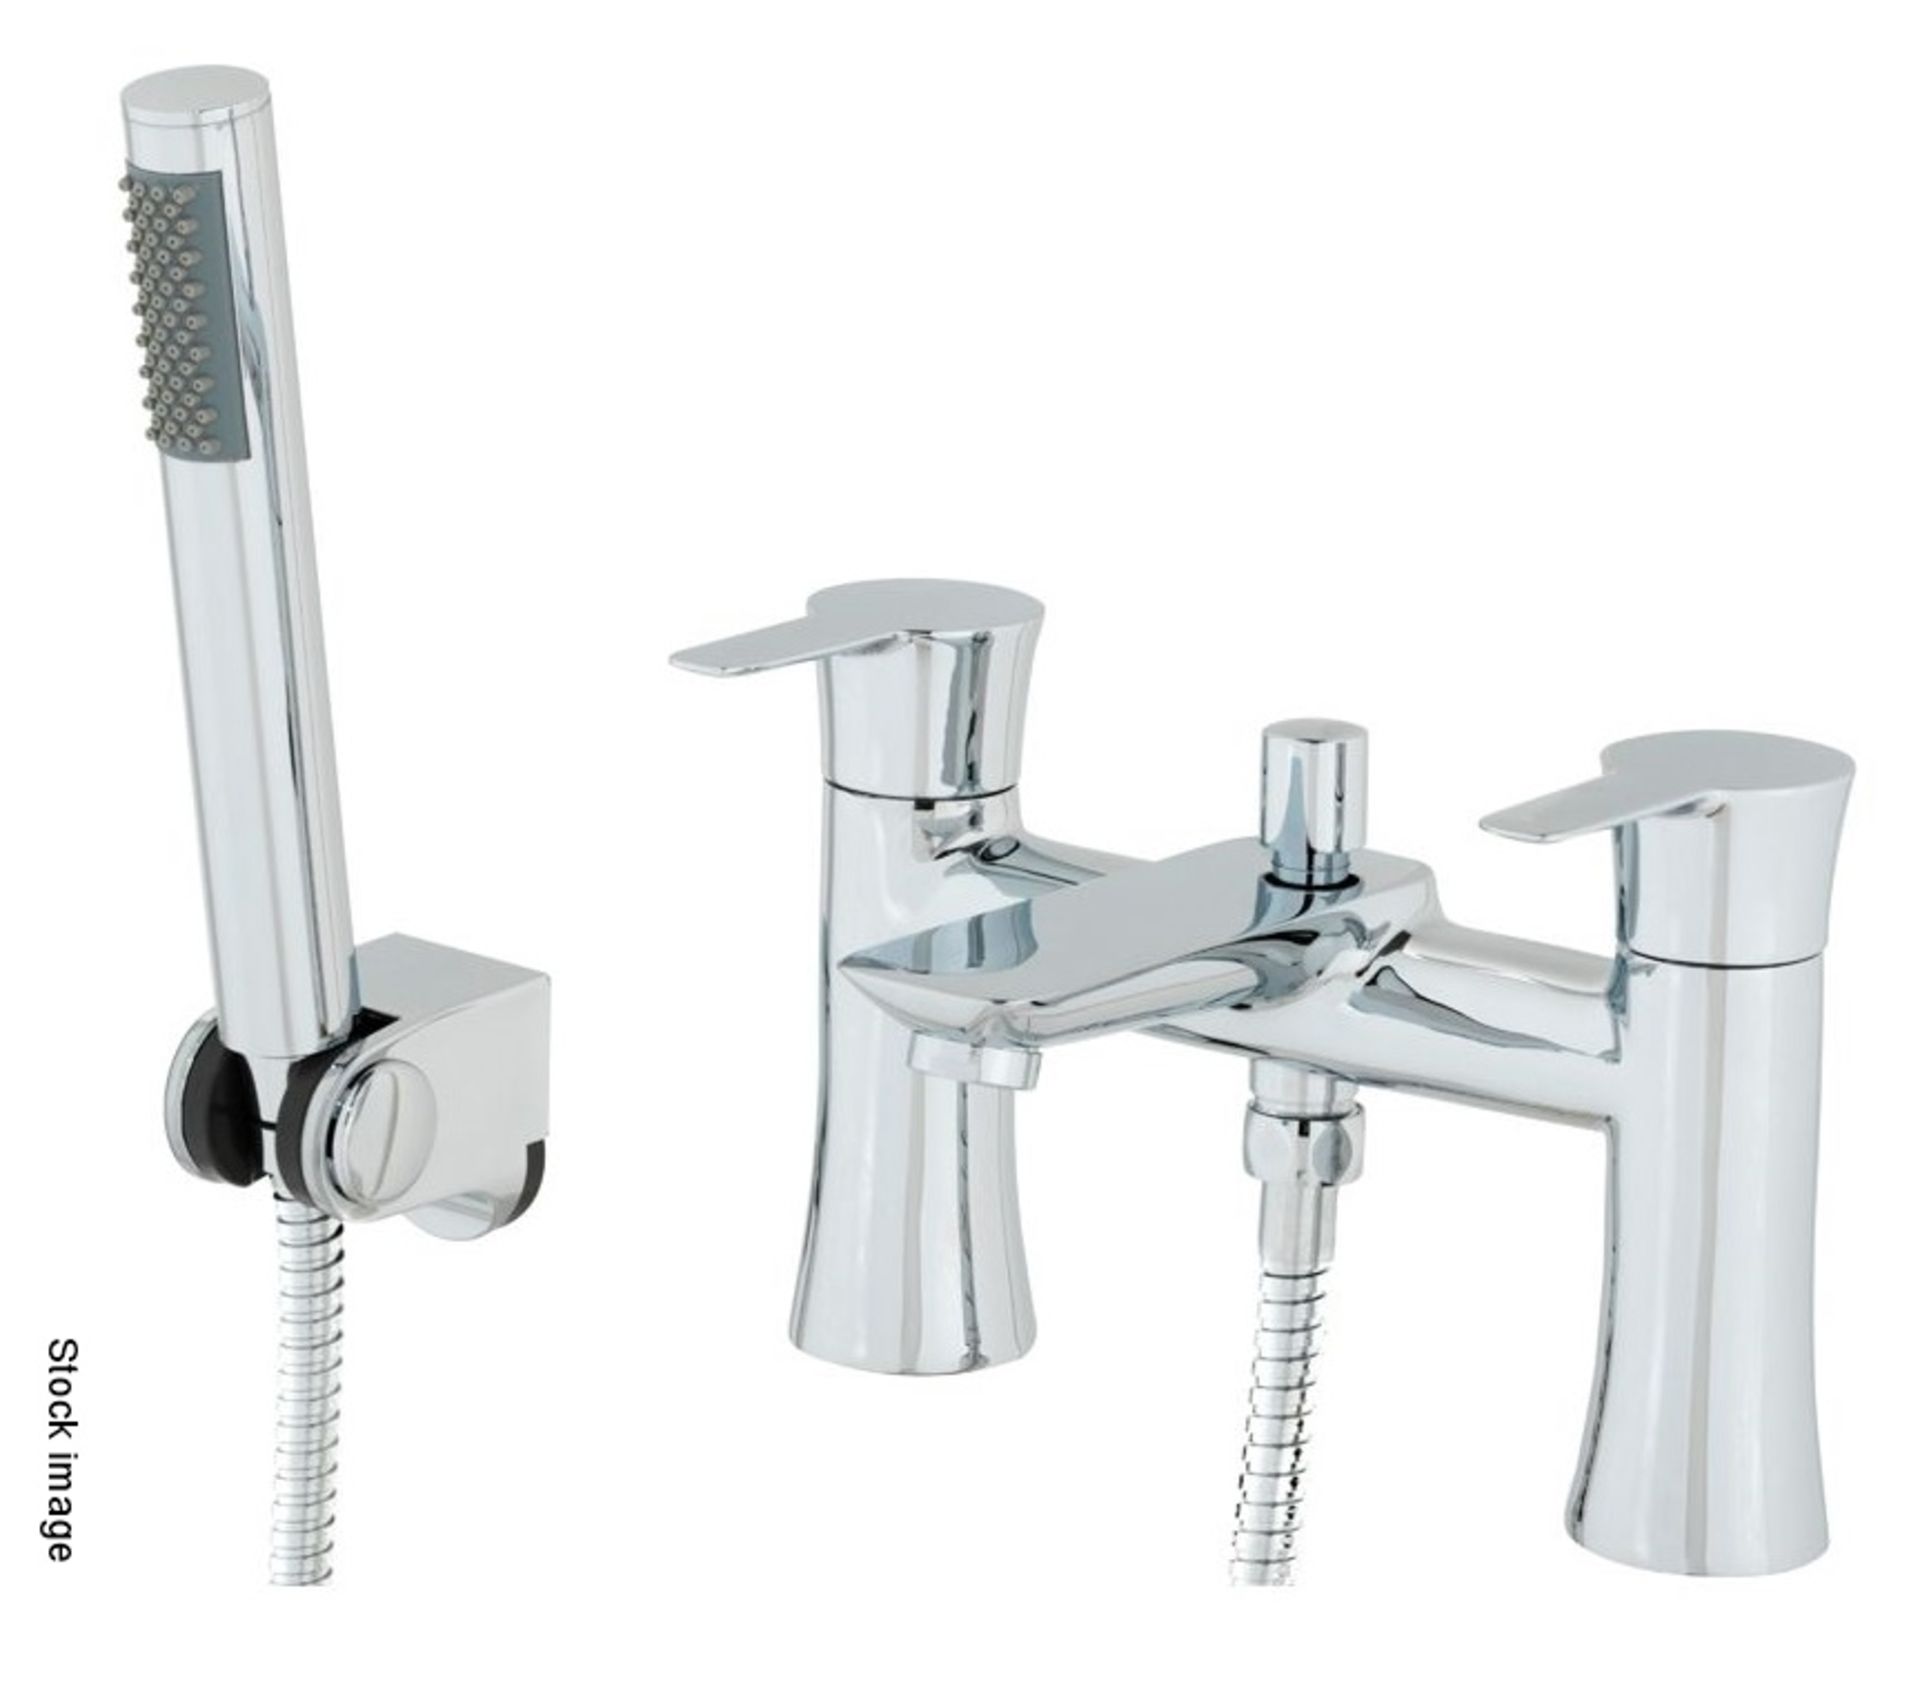 1 x CASSELLIE 'Pedras' Modern Bath Shower Mixer In Chrome - Ref: PED002 - New & Boxed Stock - RRP £